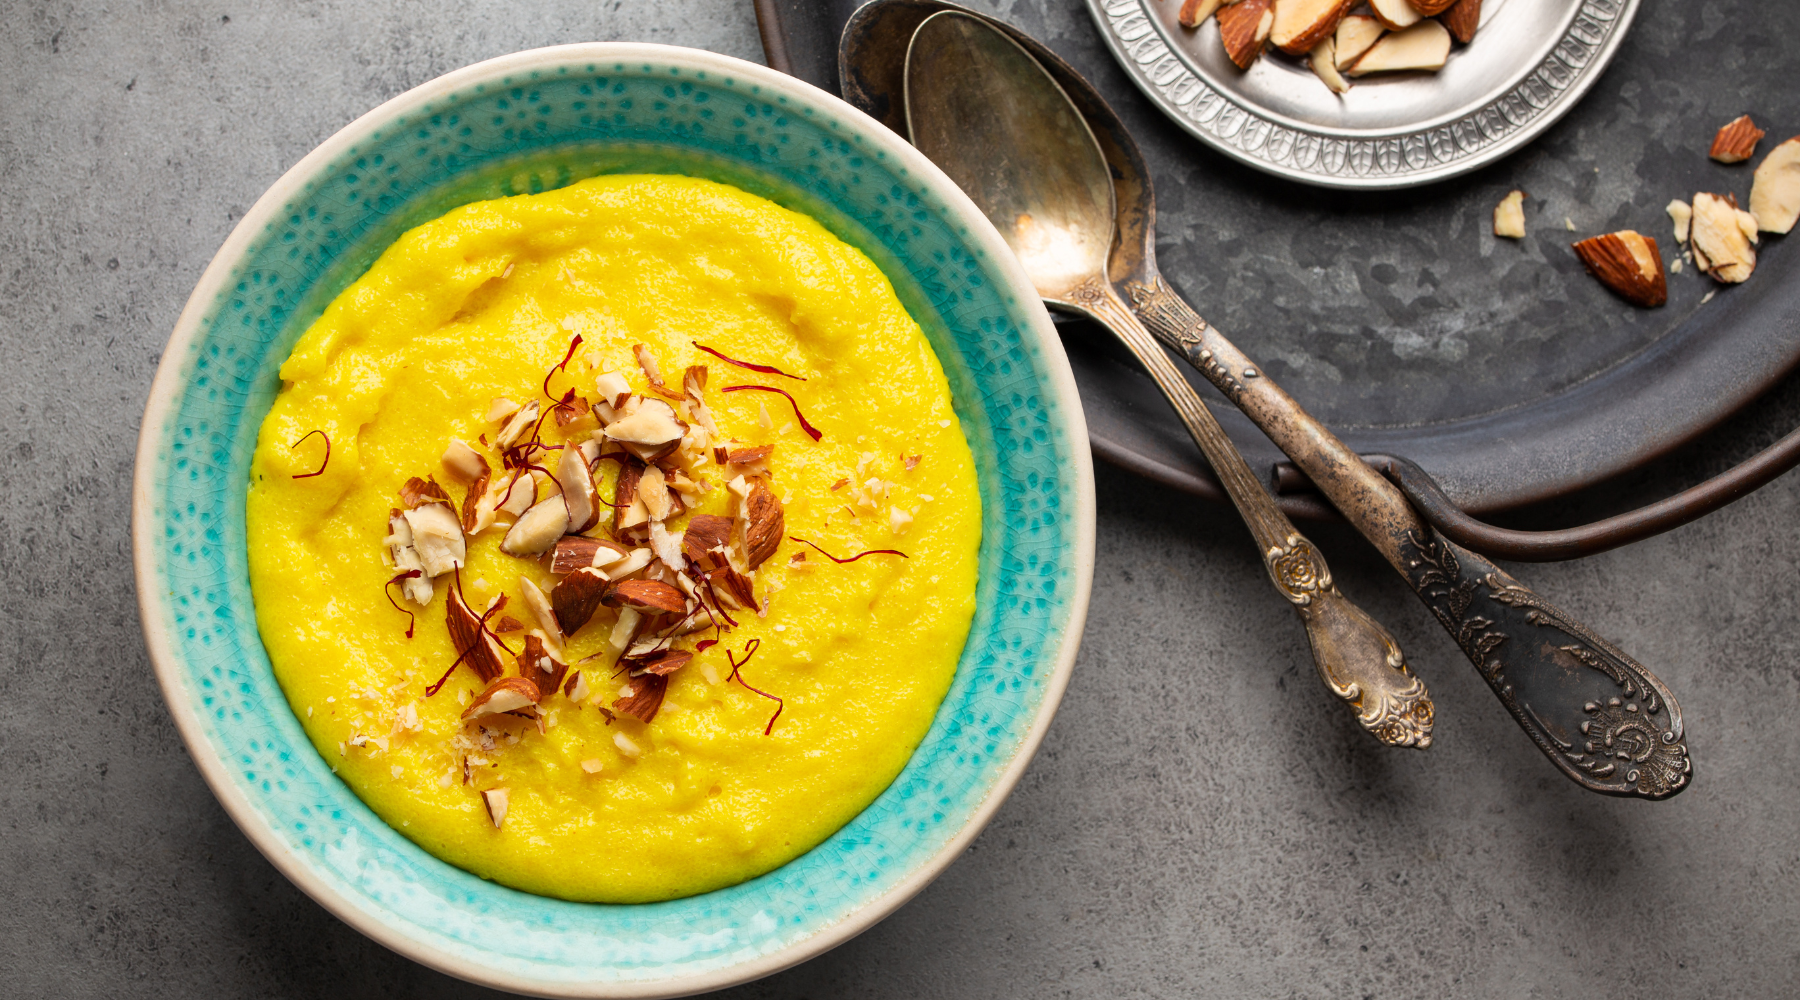 Indian breakfast recipe - kheer: A delectable rice pudding infused with saffron, perfect for a flavorful start to your day.